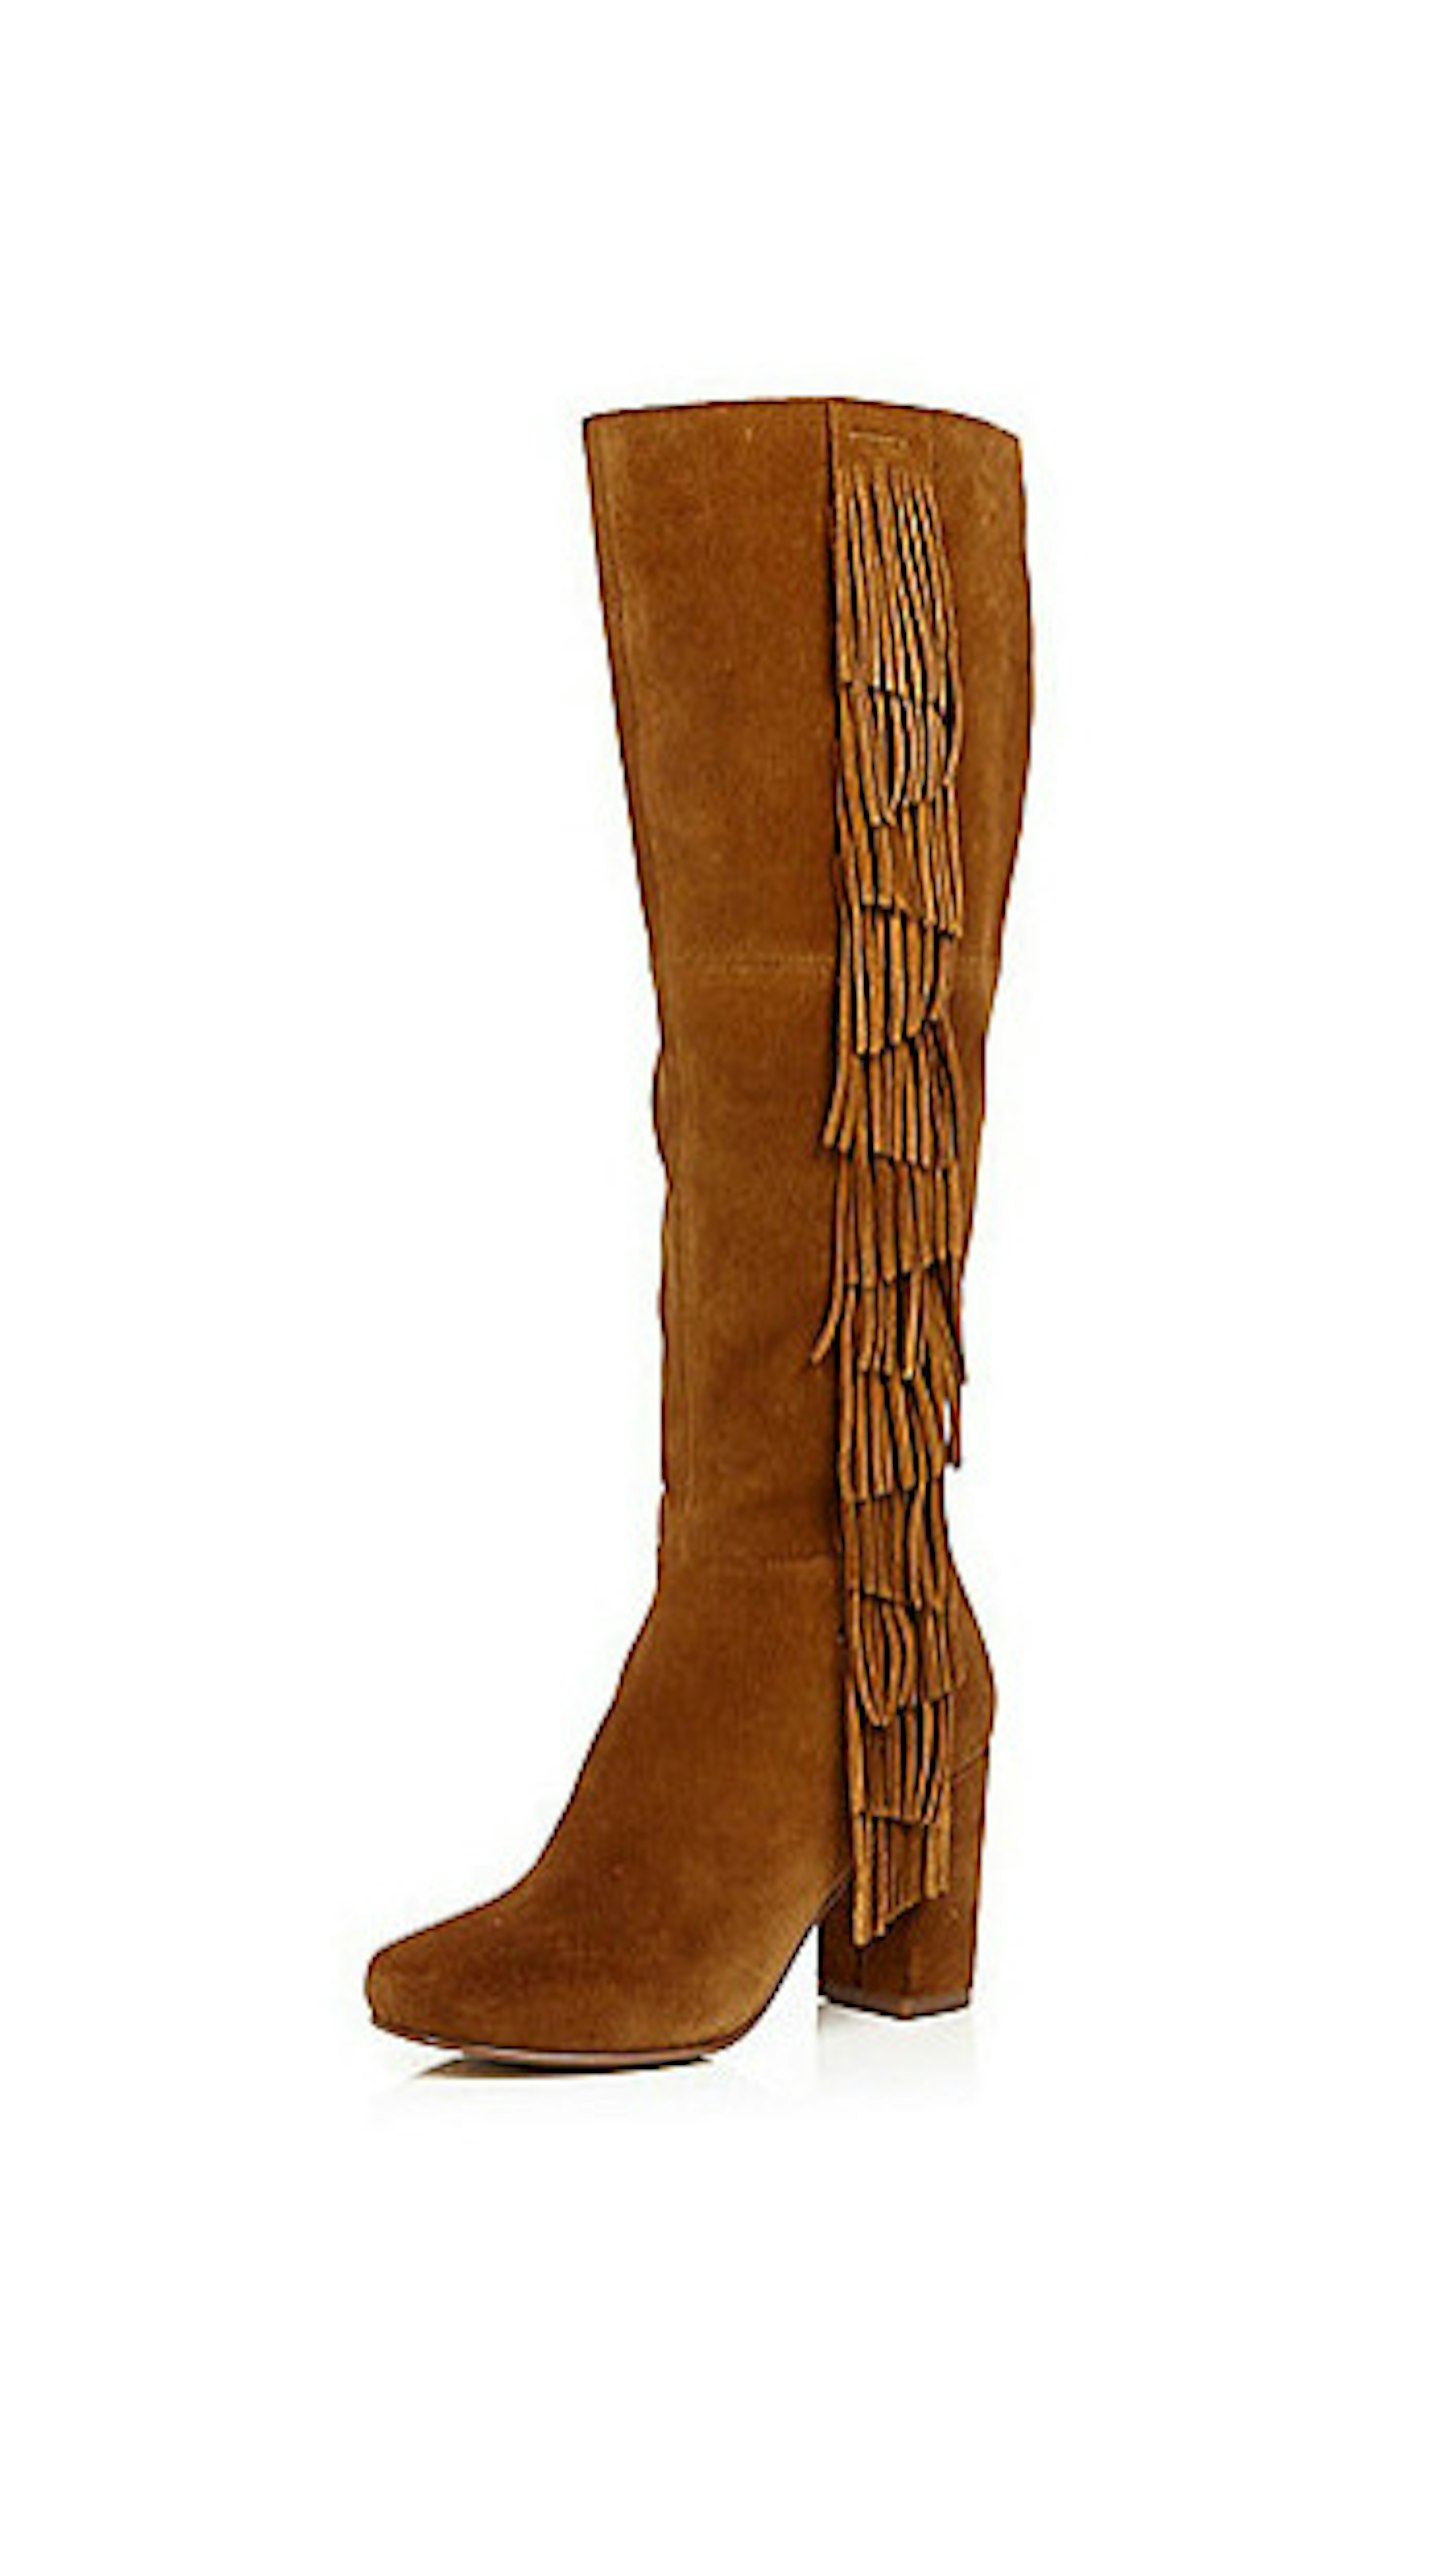 Brown suede fringed knee high heeled boots, £95